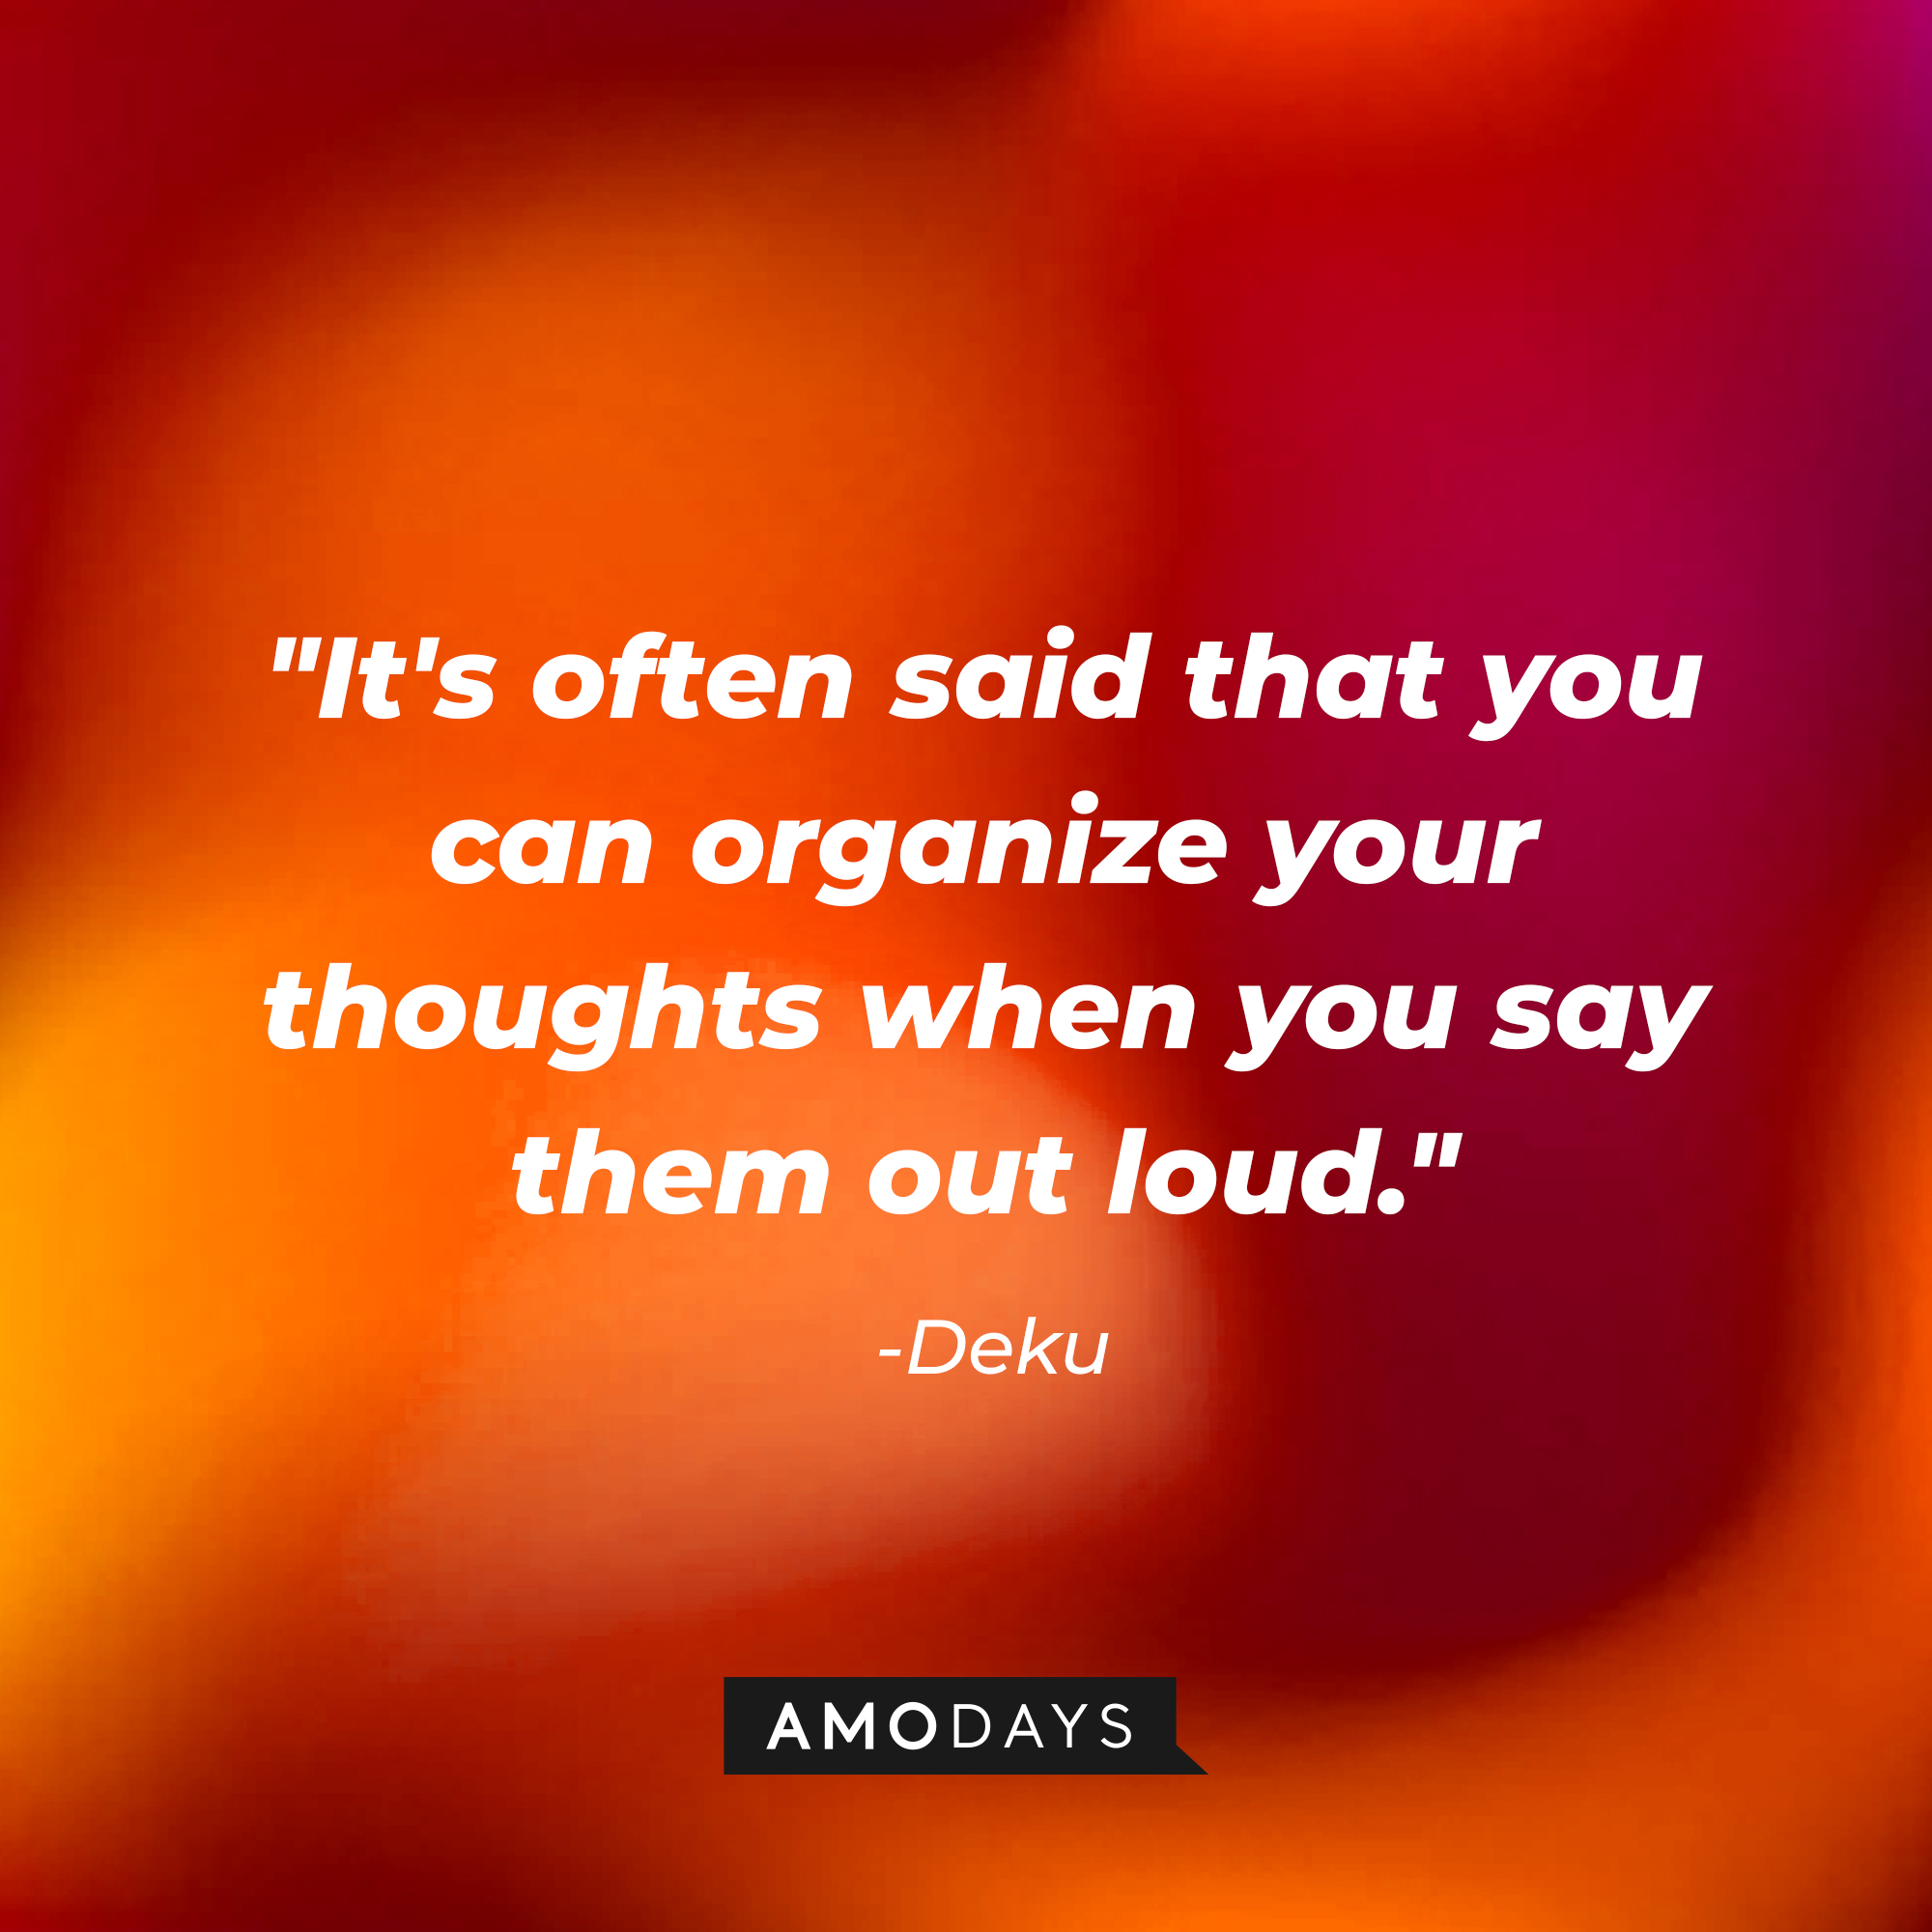 Deku's quote: "It's often said that you can organize your thoughts when you say them out loud." | Source: AmoDays